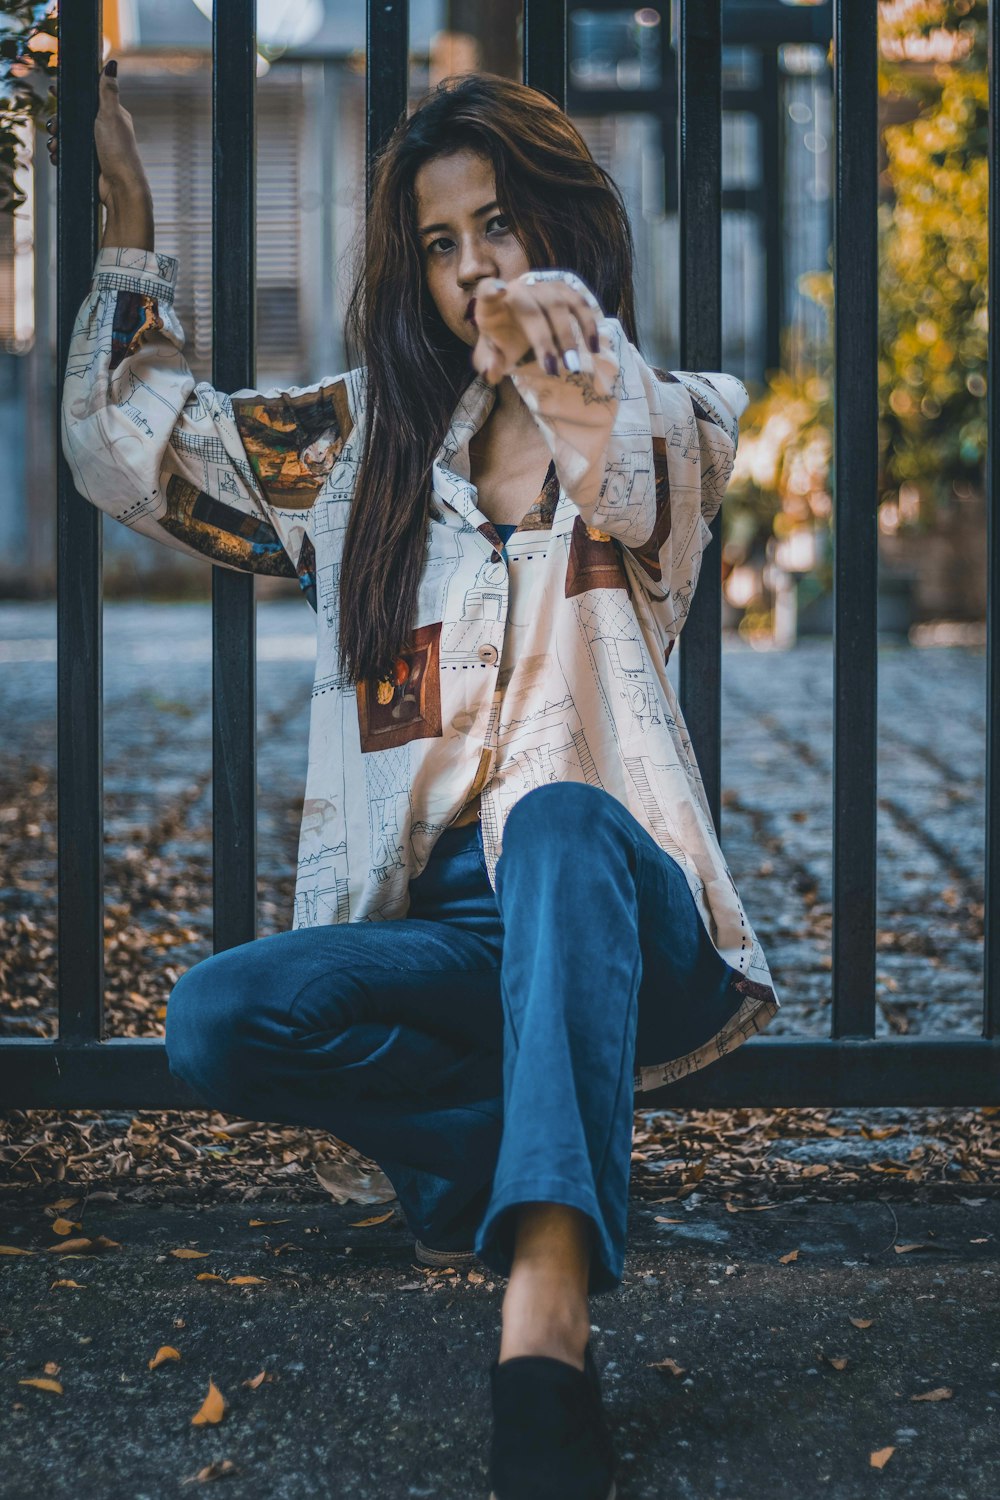 Woman in blue denim jacket and blue denim jeans sitting on brown wooden  bench during daytime photo – Free Street Image on Unsplash